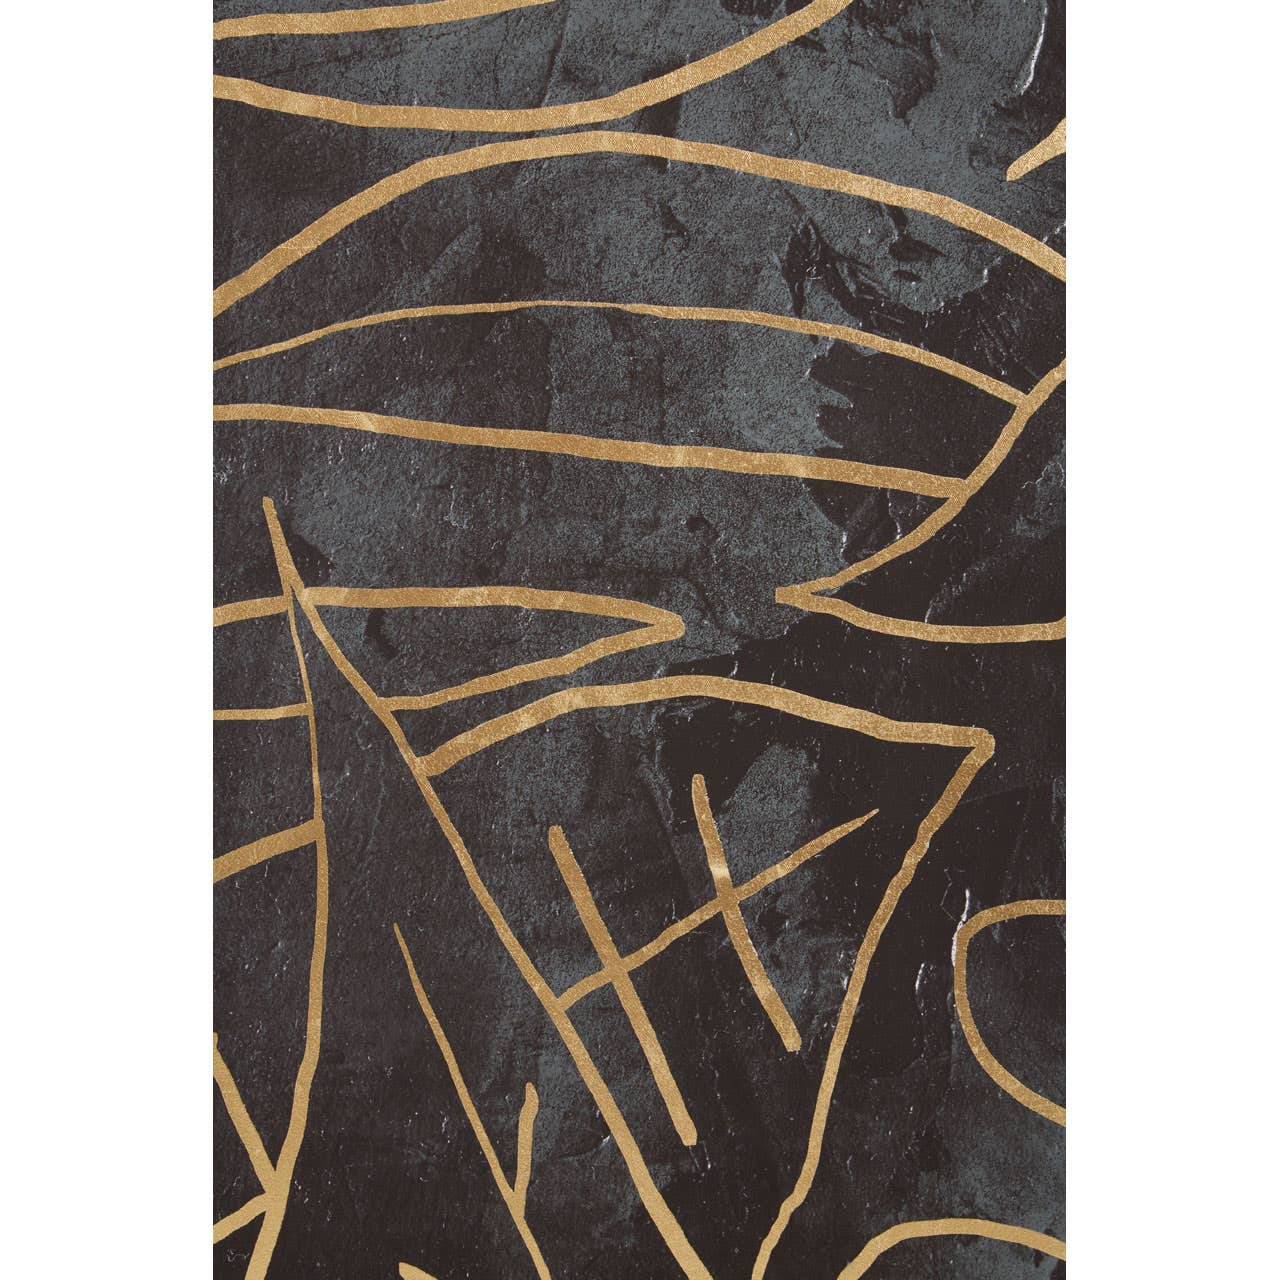 Noosa & Co. Accessories Astratto Canvas Black And Gold Wall Art House of Isabella UK